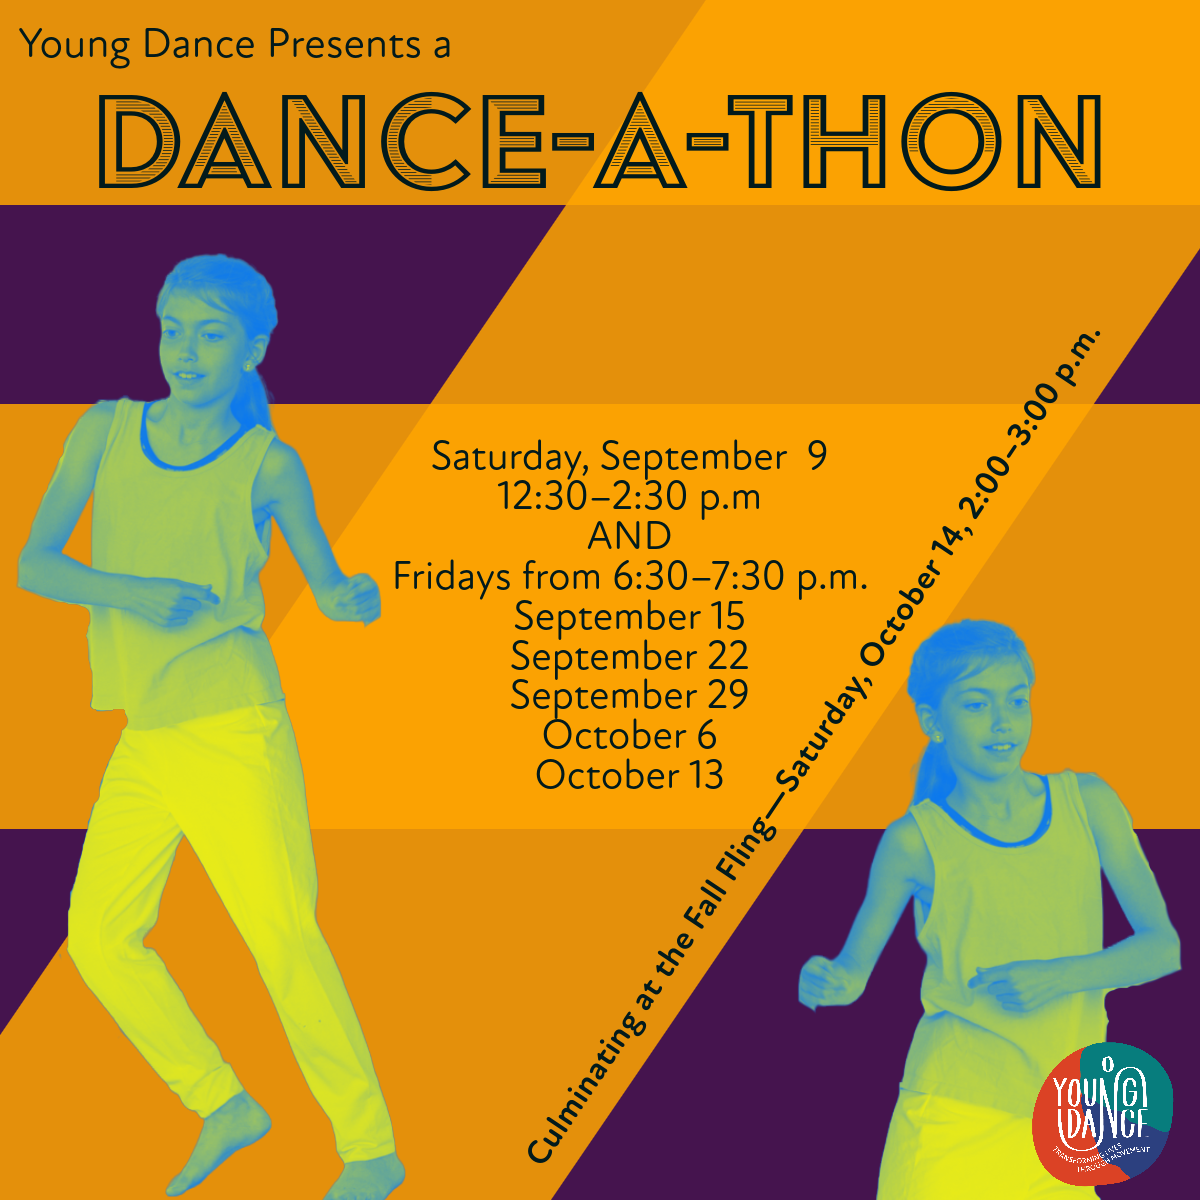 2 Dancers with text Young Dance Presents a Dance-a-Thon: Dance-a-Thon Parties Saturday, September. 9, 12:30–2:30 p.m. Friday nights 6:30–7:30 p.m. September 15 September 22 September 29 October 6 October 13 Culminating with a community-wide, outdoor dance party before the Fall Fling on Saturday, October 14, 2:00–3:00 p.m."